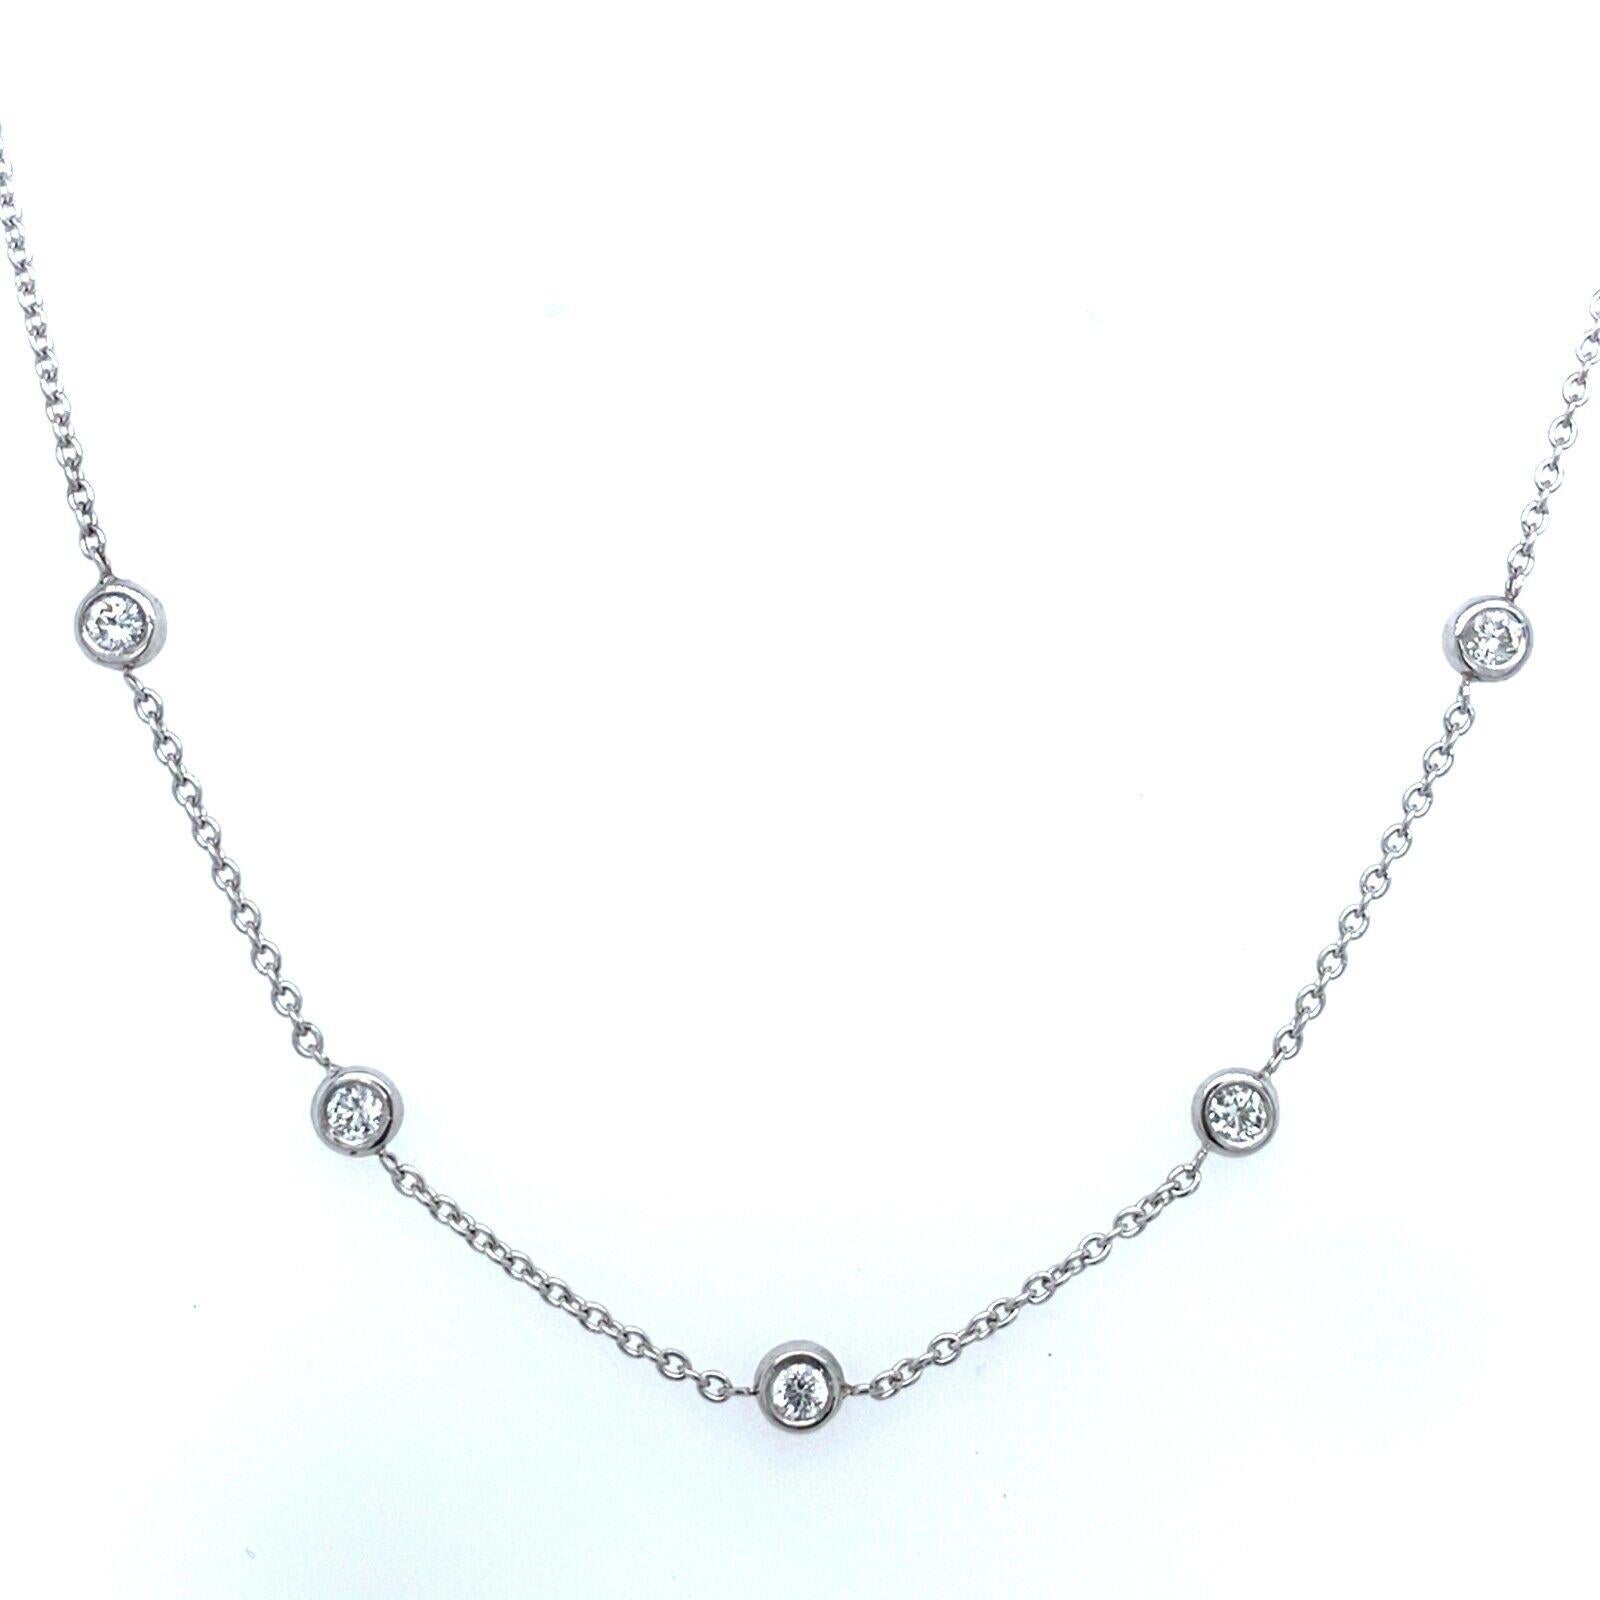 A classic and elegant style, this 5-stone Diamond pendant necklace set in 14ct White Gold is a timeless piece that will never go out of style. 

The set includes 5 round brilliant cut Diamonds in rubover setting with a total Diamond carat weight of